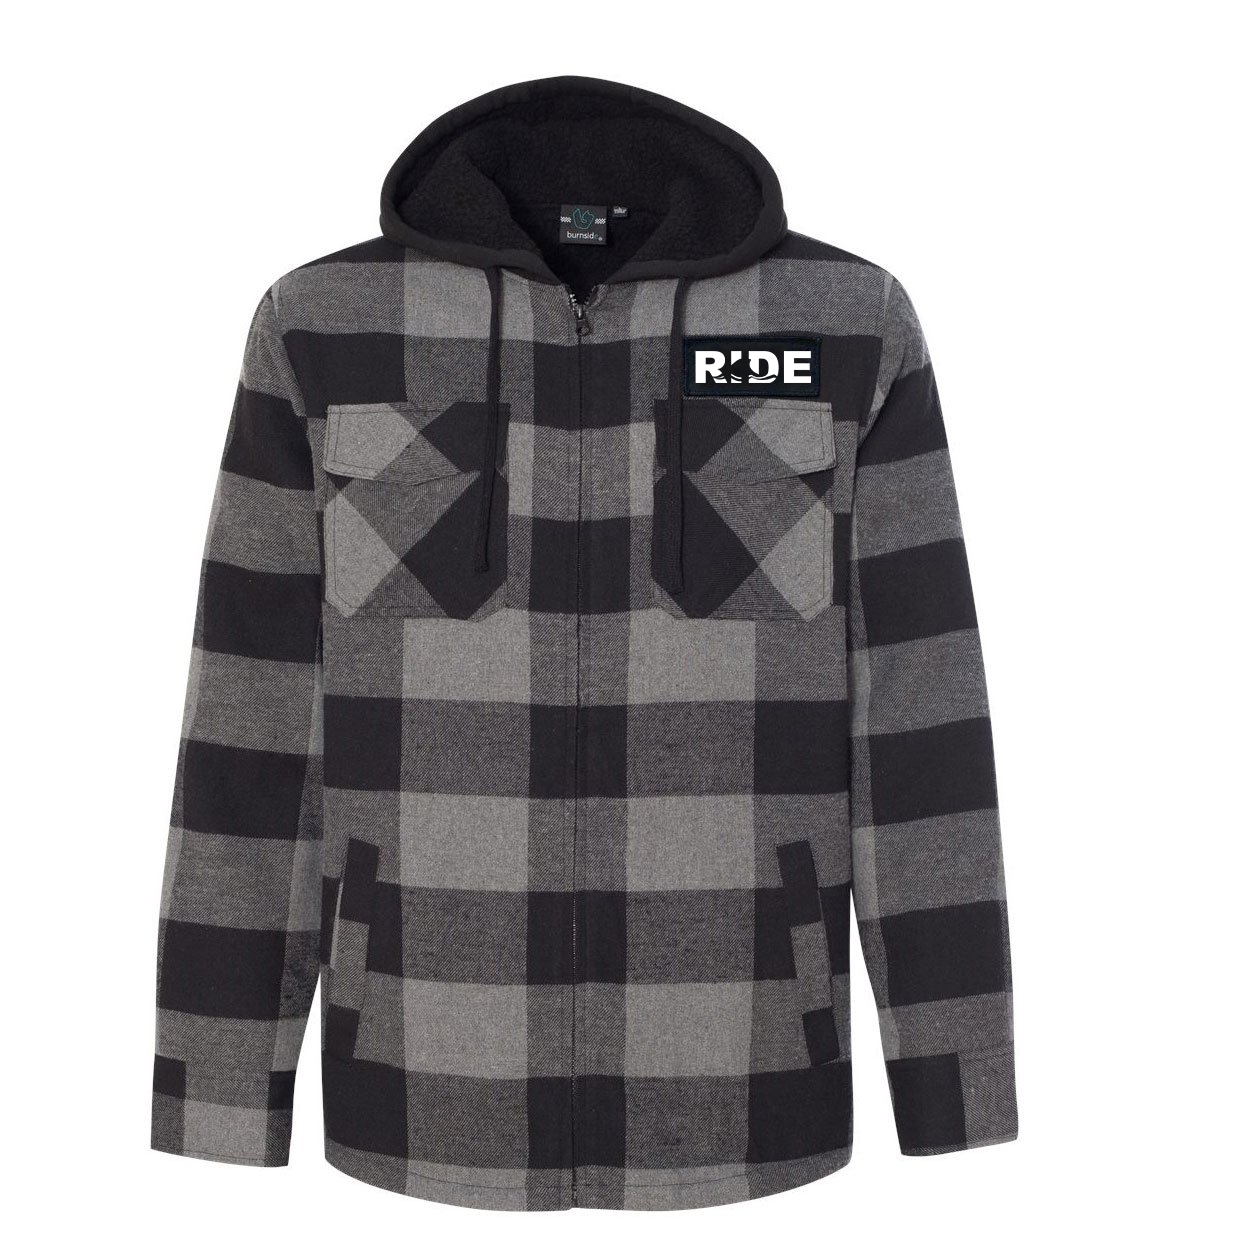 Ride Wave Logo Classic Unisex Full Zip Woven Patch Hooded Flannel Jacket Black/Gray (White Logo)